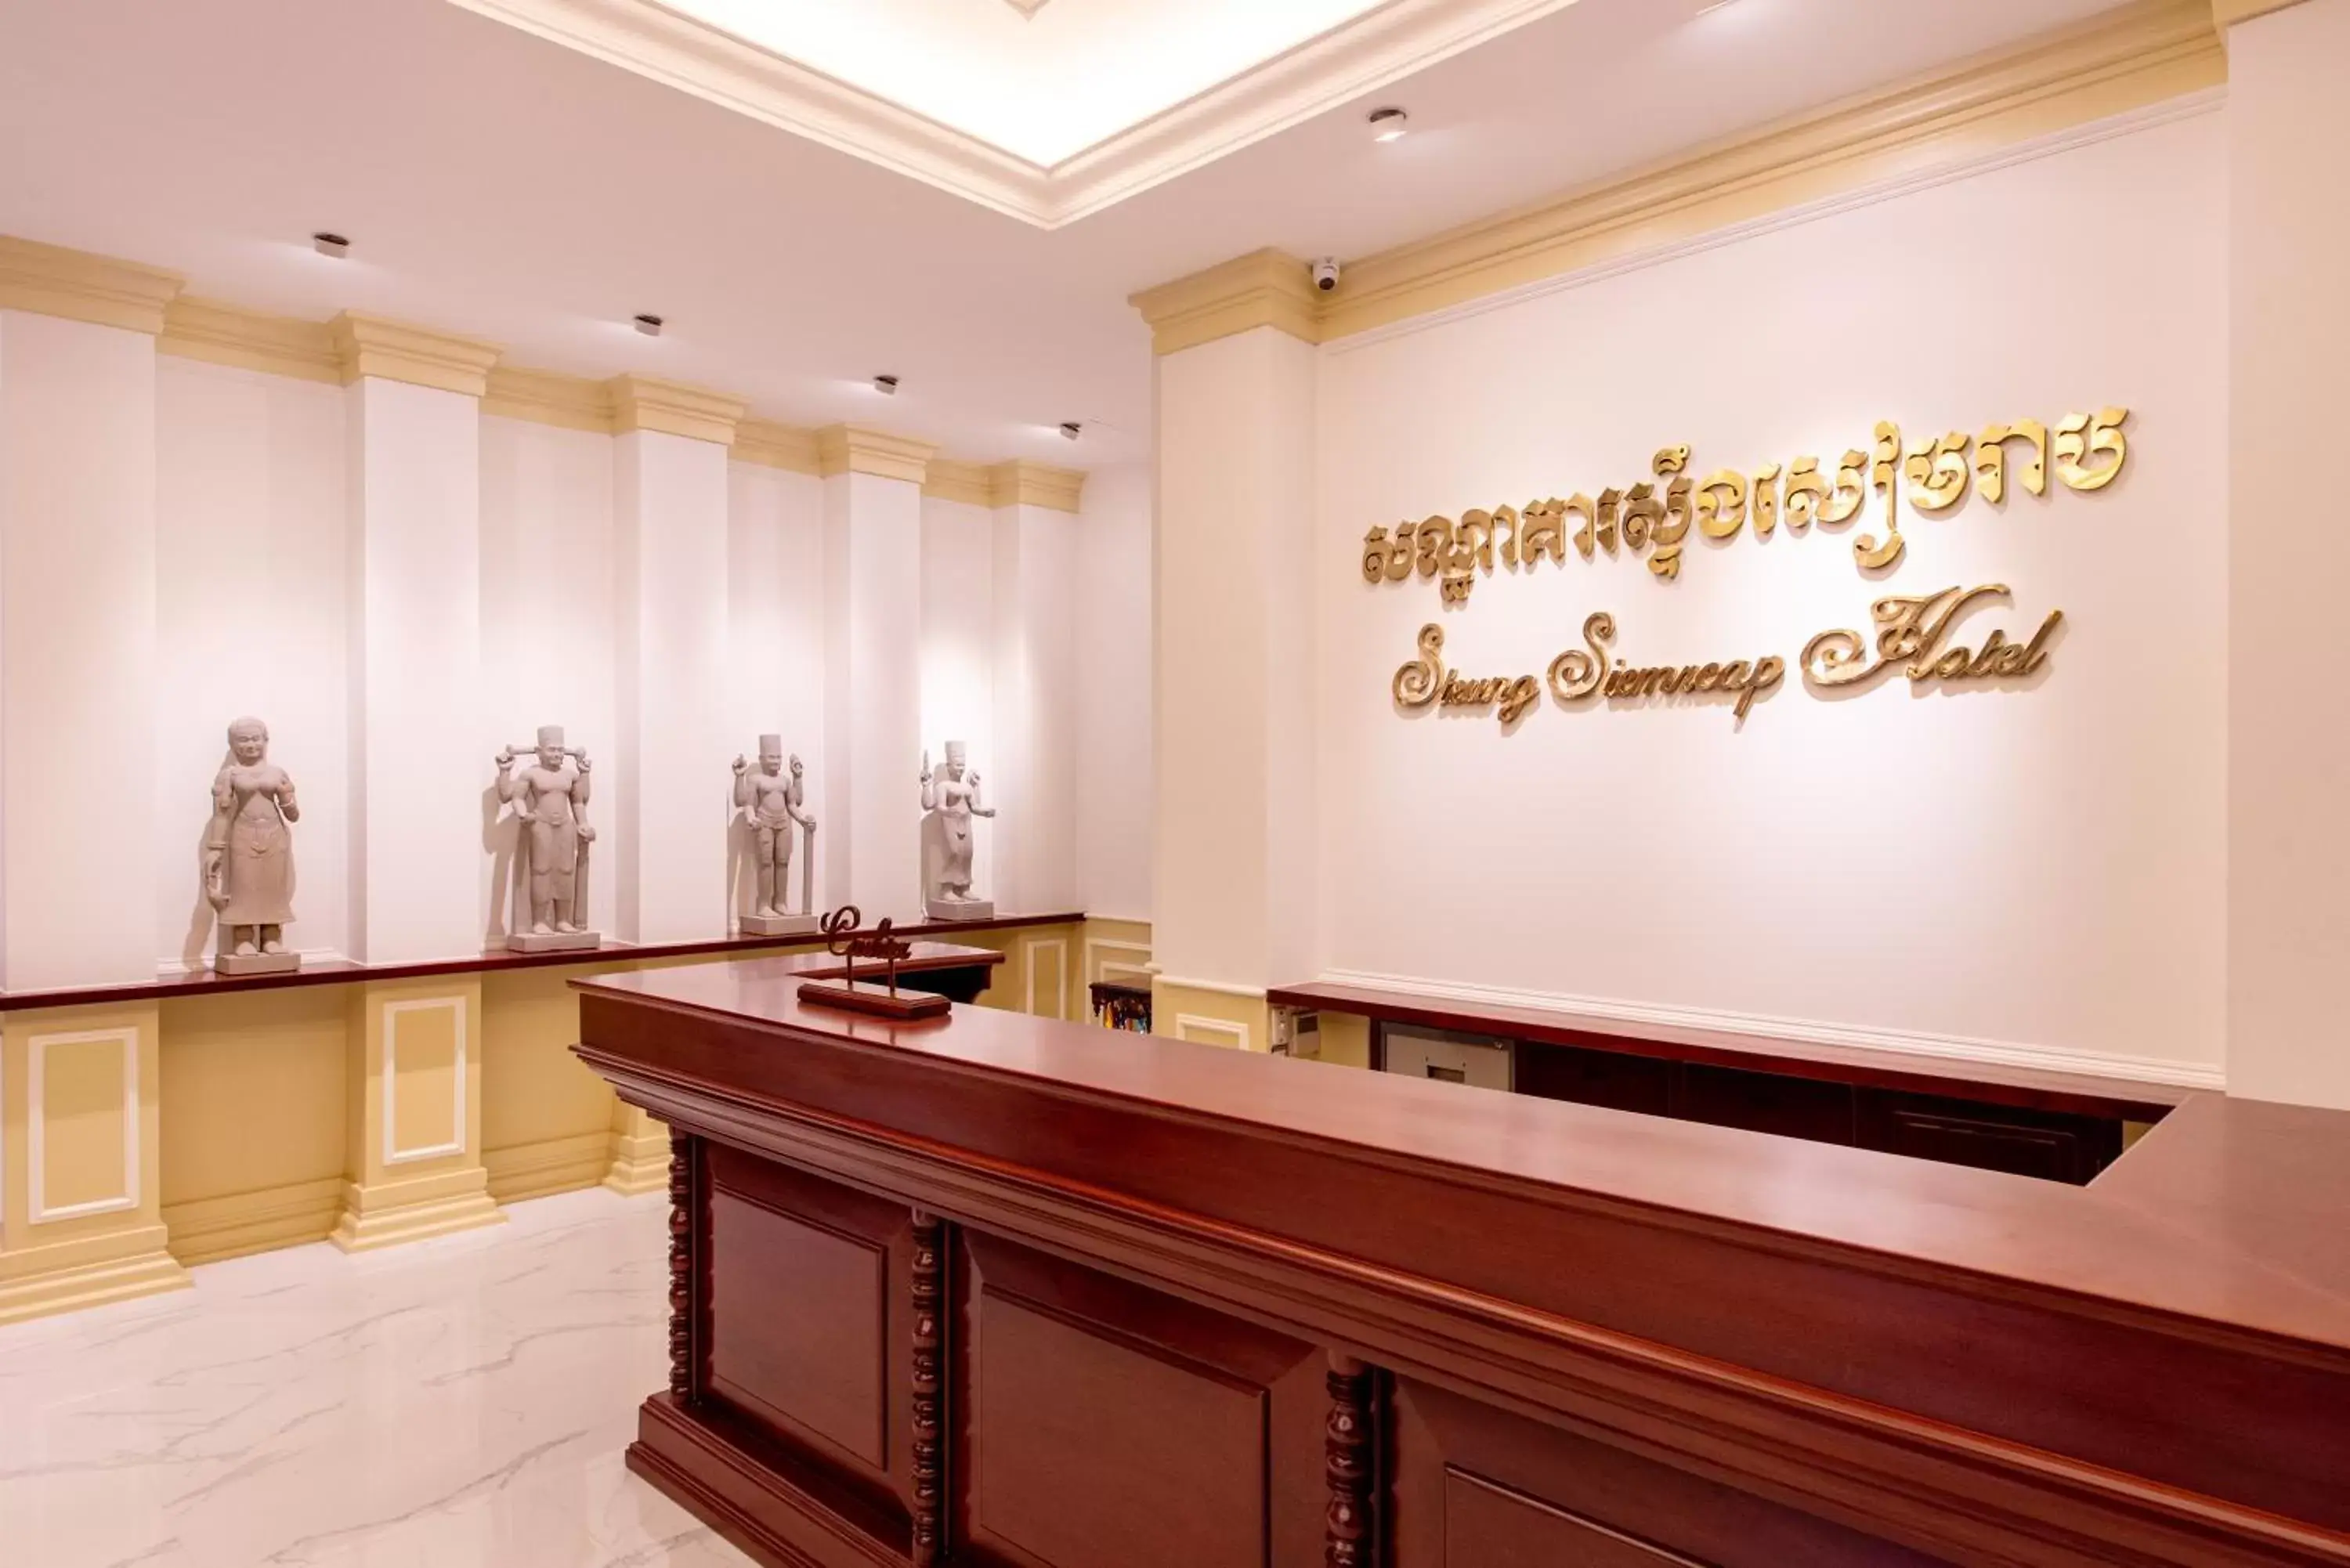 Property building, Lobby/Reception in Steung Siemreap Hotel